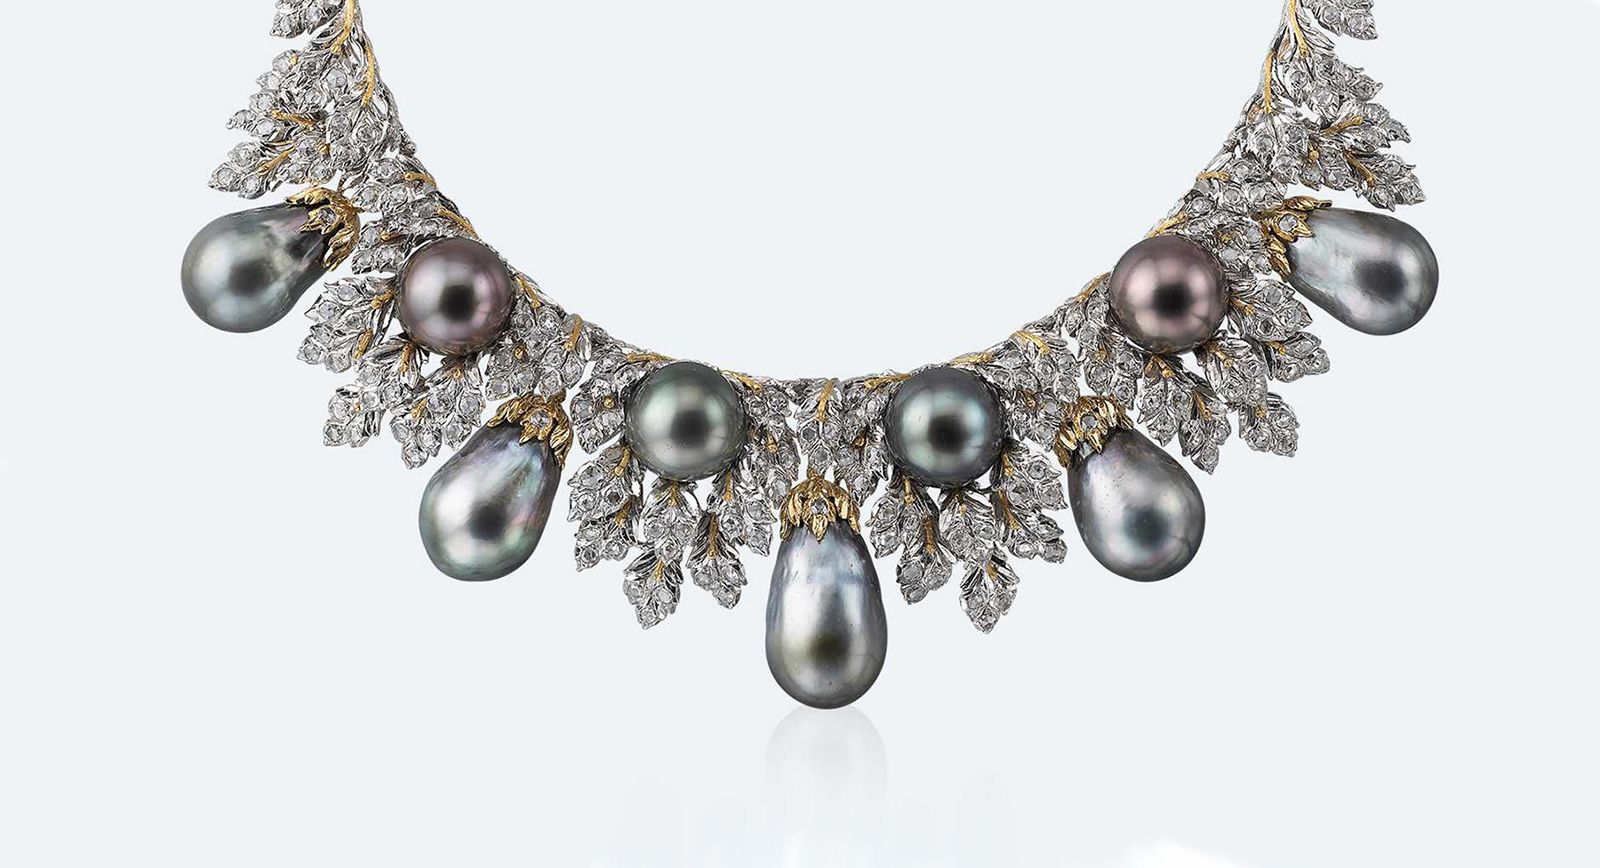 Buccellati launches 'One of a Kind' high-jewellery collection